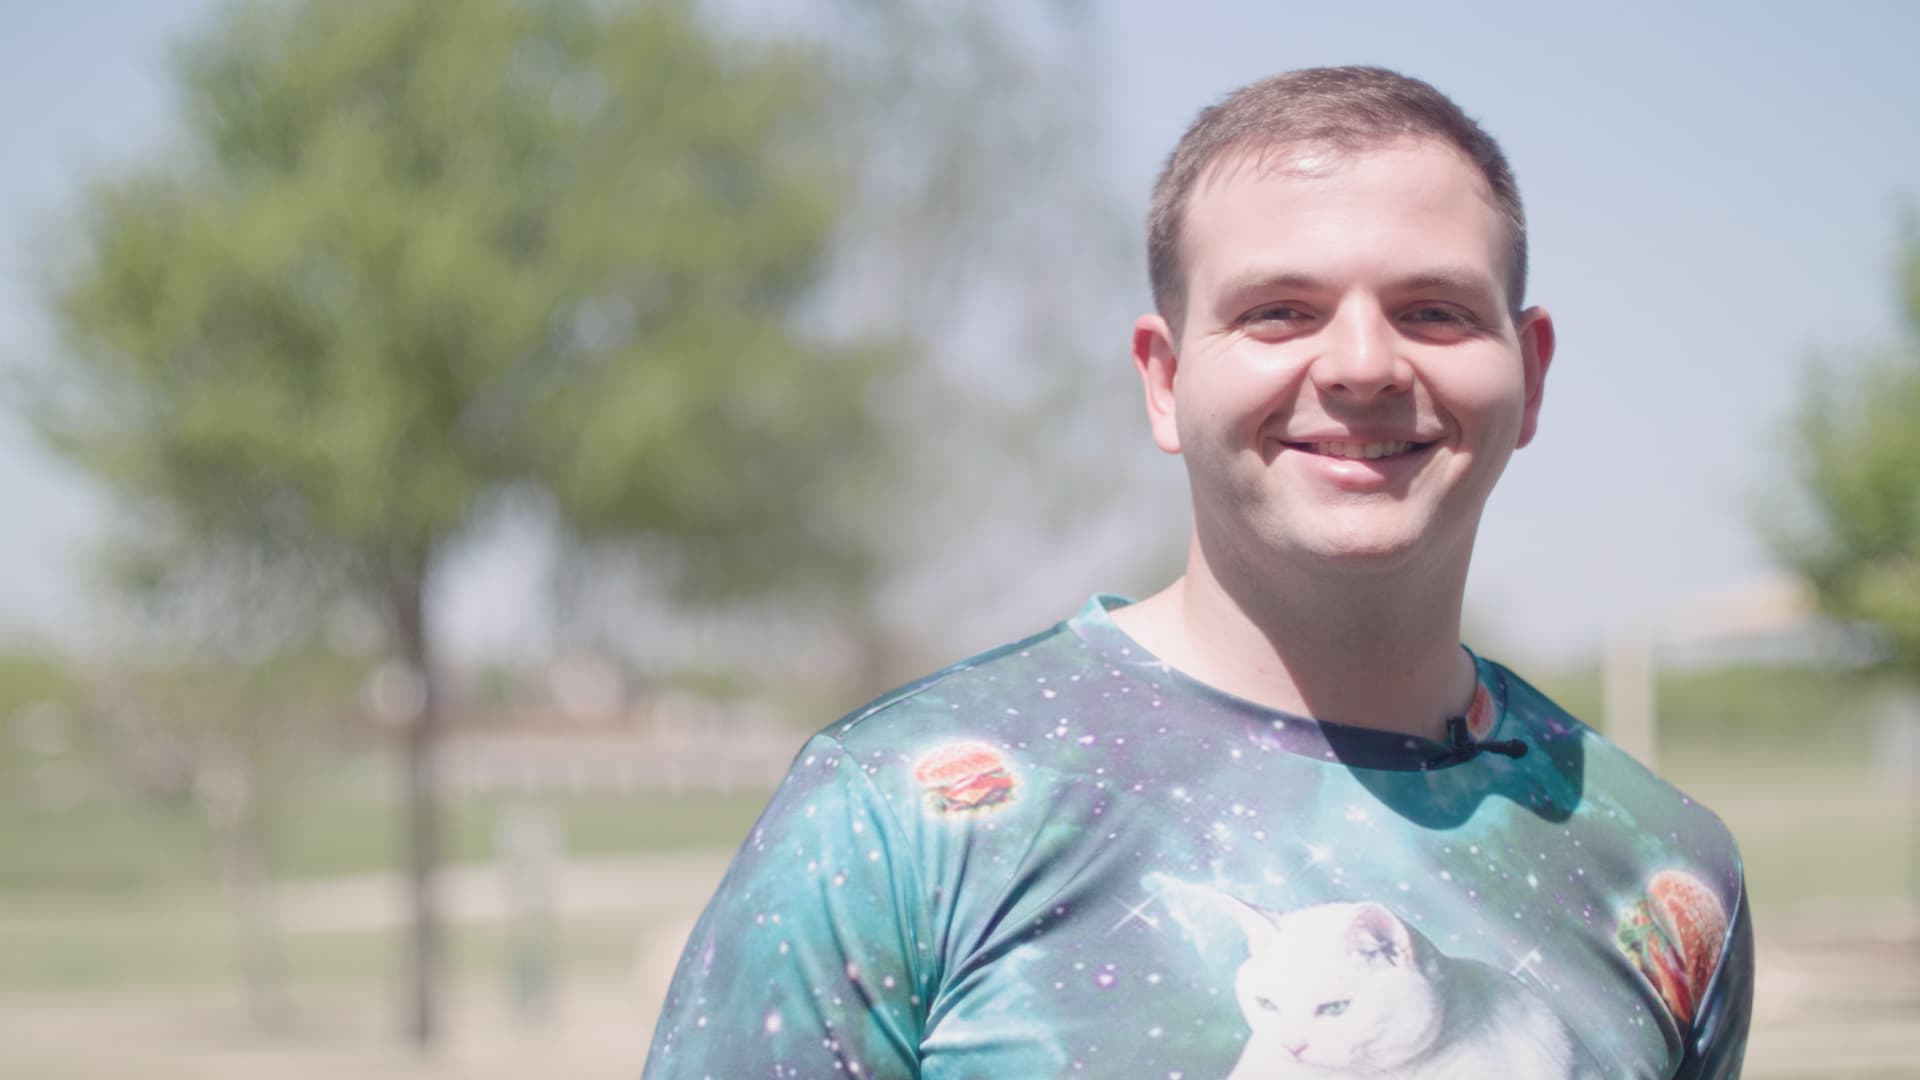 This 26-year-old Google engineer earns $270,000 a year and still uses coupons